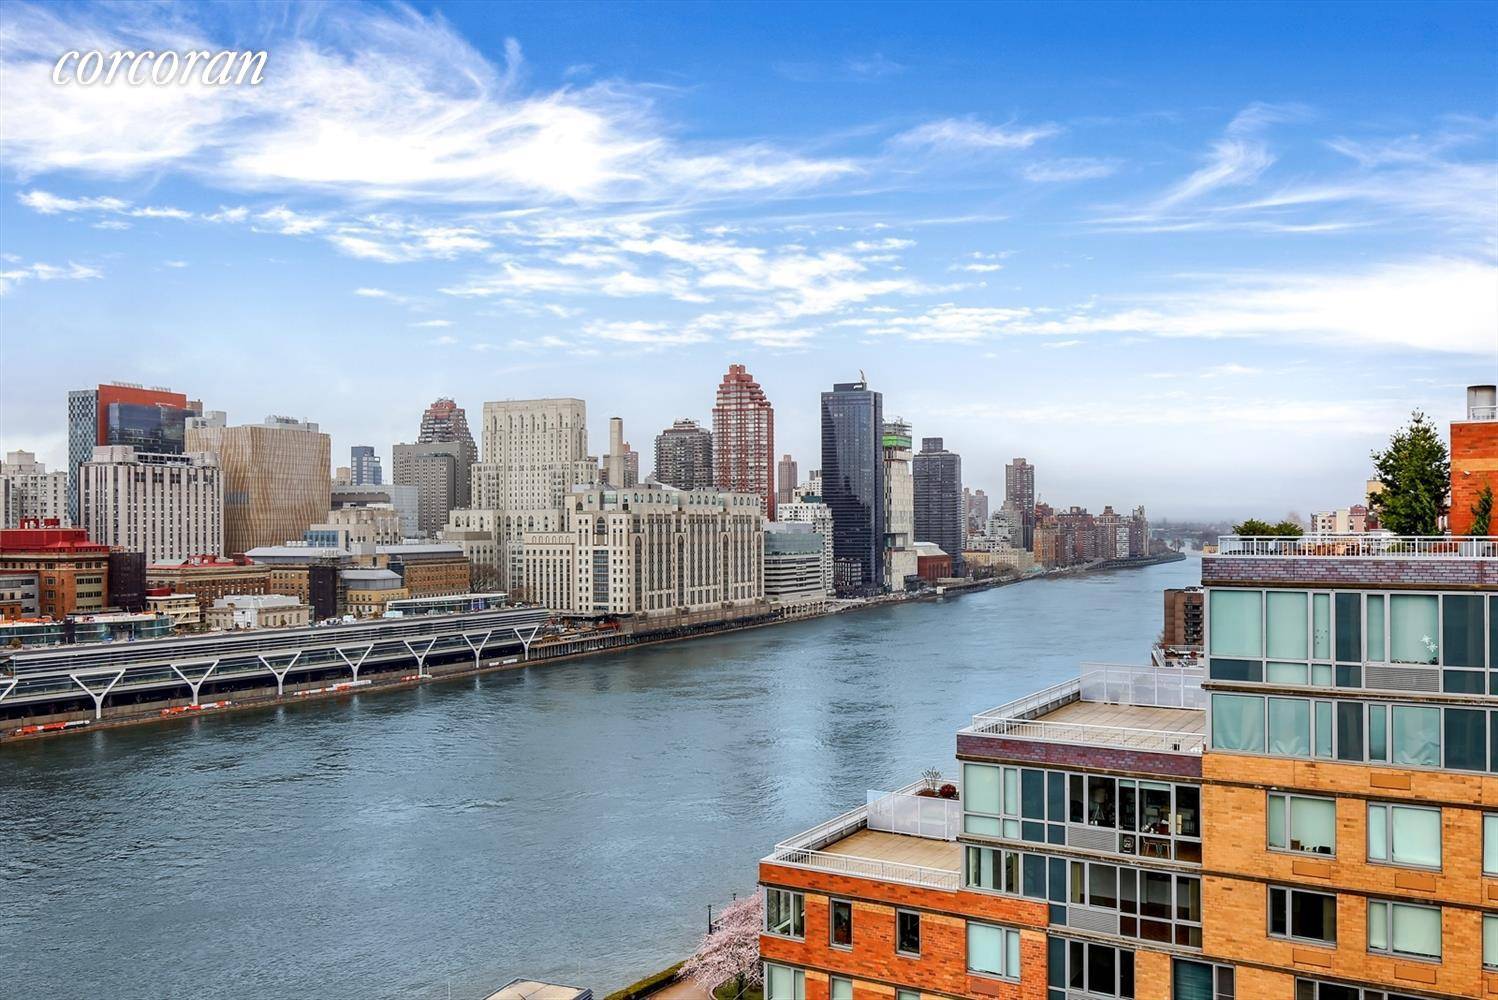 Extremely Rare 2 Bedroom 2 Bathroom Penthouse with 12ft Ceilings, Manhattan amp ; River Views, and a Huge Storage Bin At Additional Cost in the Most Desirable Condo Building on ...